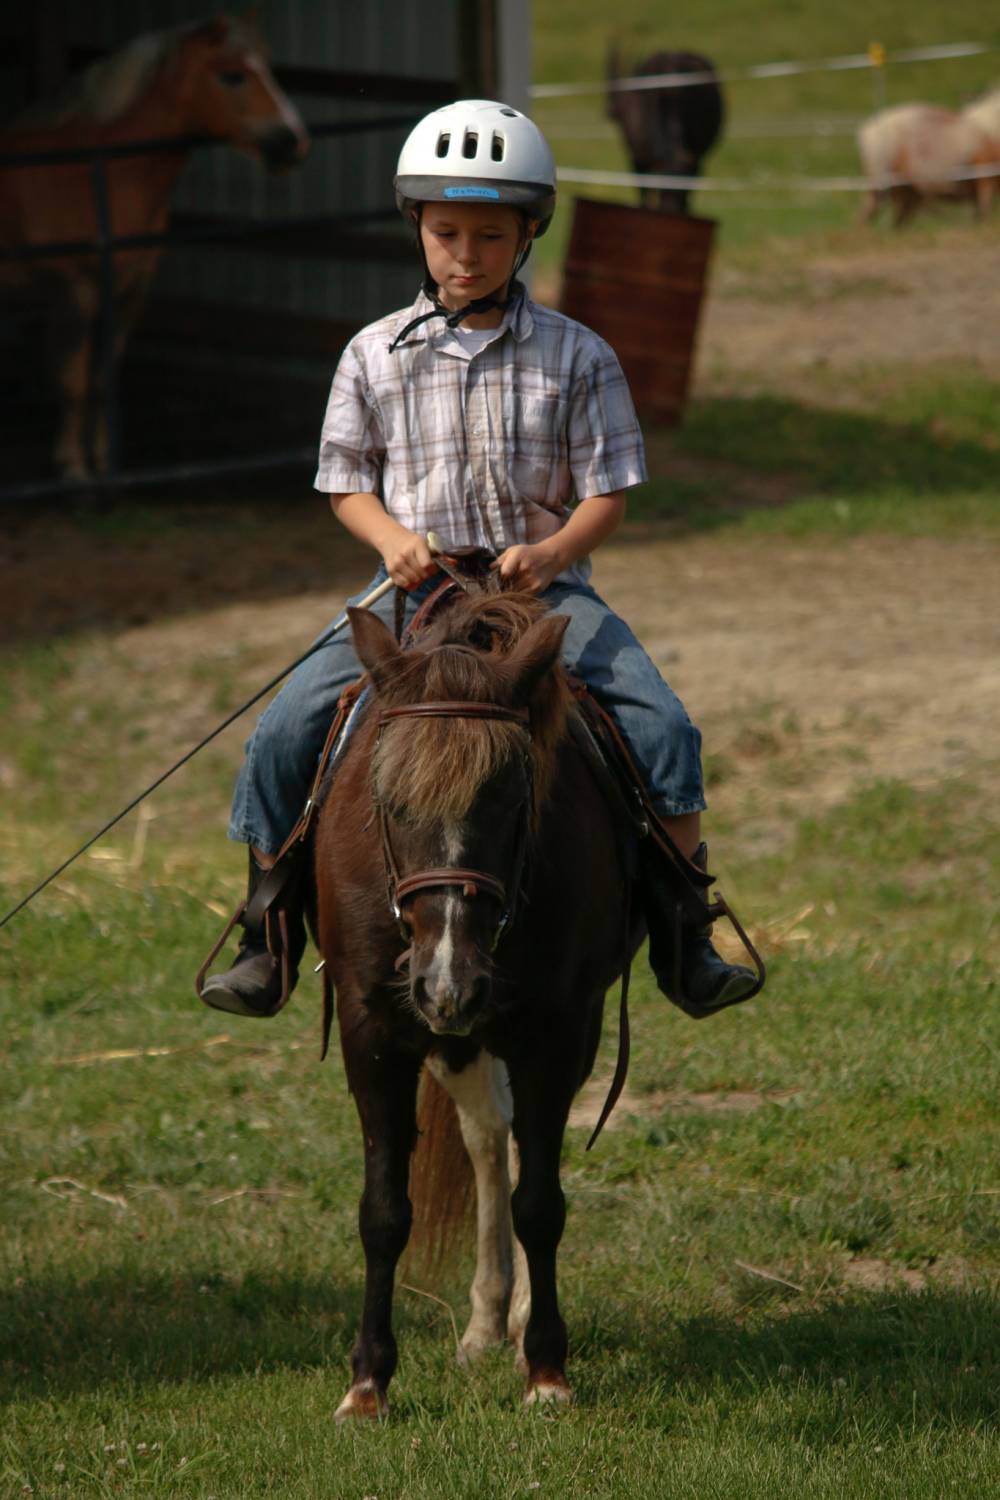 TOP PENNSYLVANIA HORSE RIDING CAMP: Fairview Farm and Guest Ranch - Rough Riders Girl s Camp is a Top Horse Riding Summer Camp located in Granville Summit Pennsylvania offering many fun and enriching Horse Riding and other camp programs. 